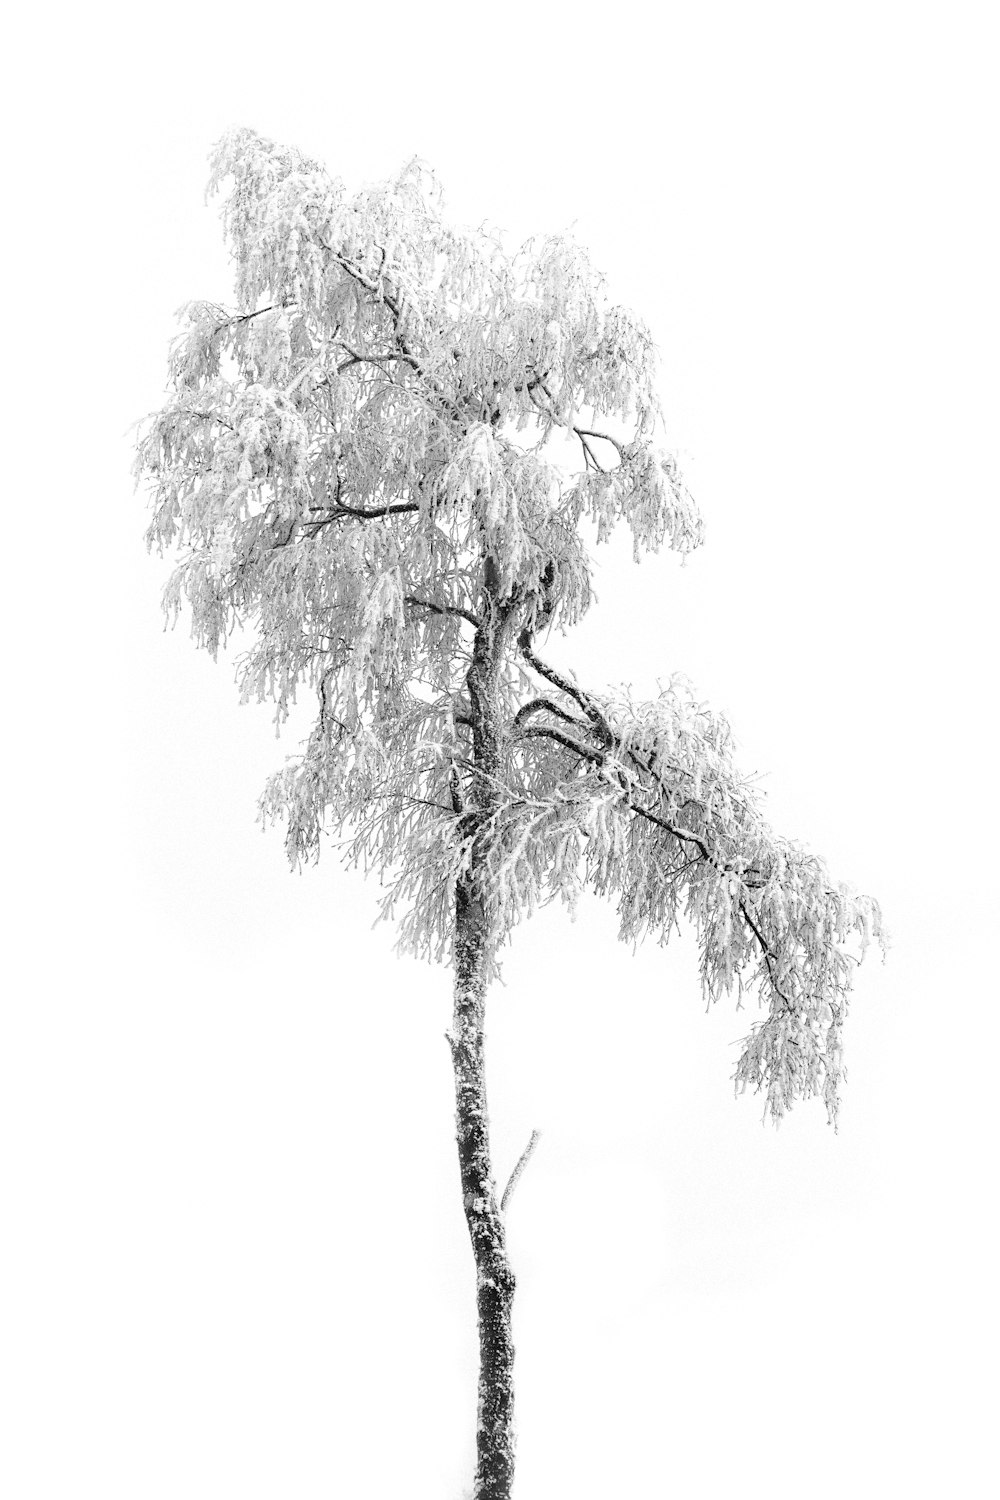 grayscale photo of tree with snow